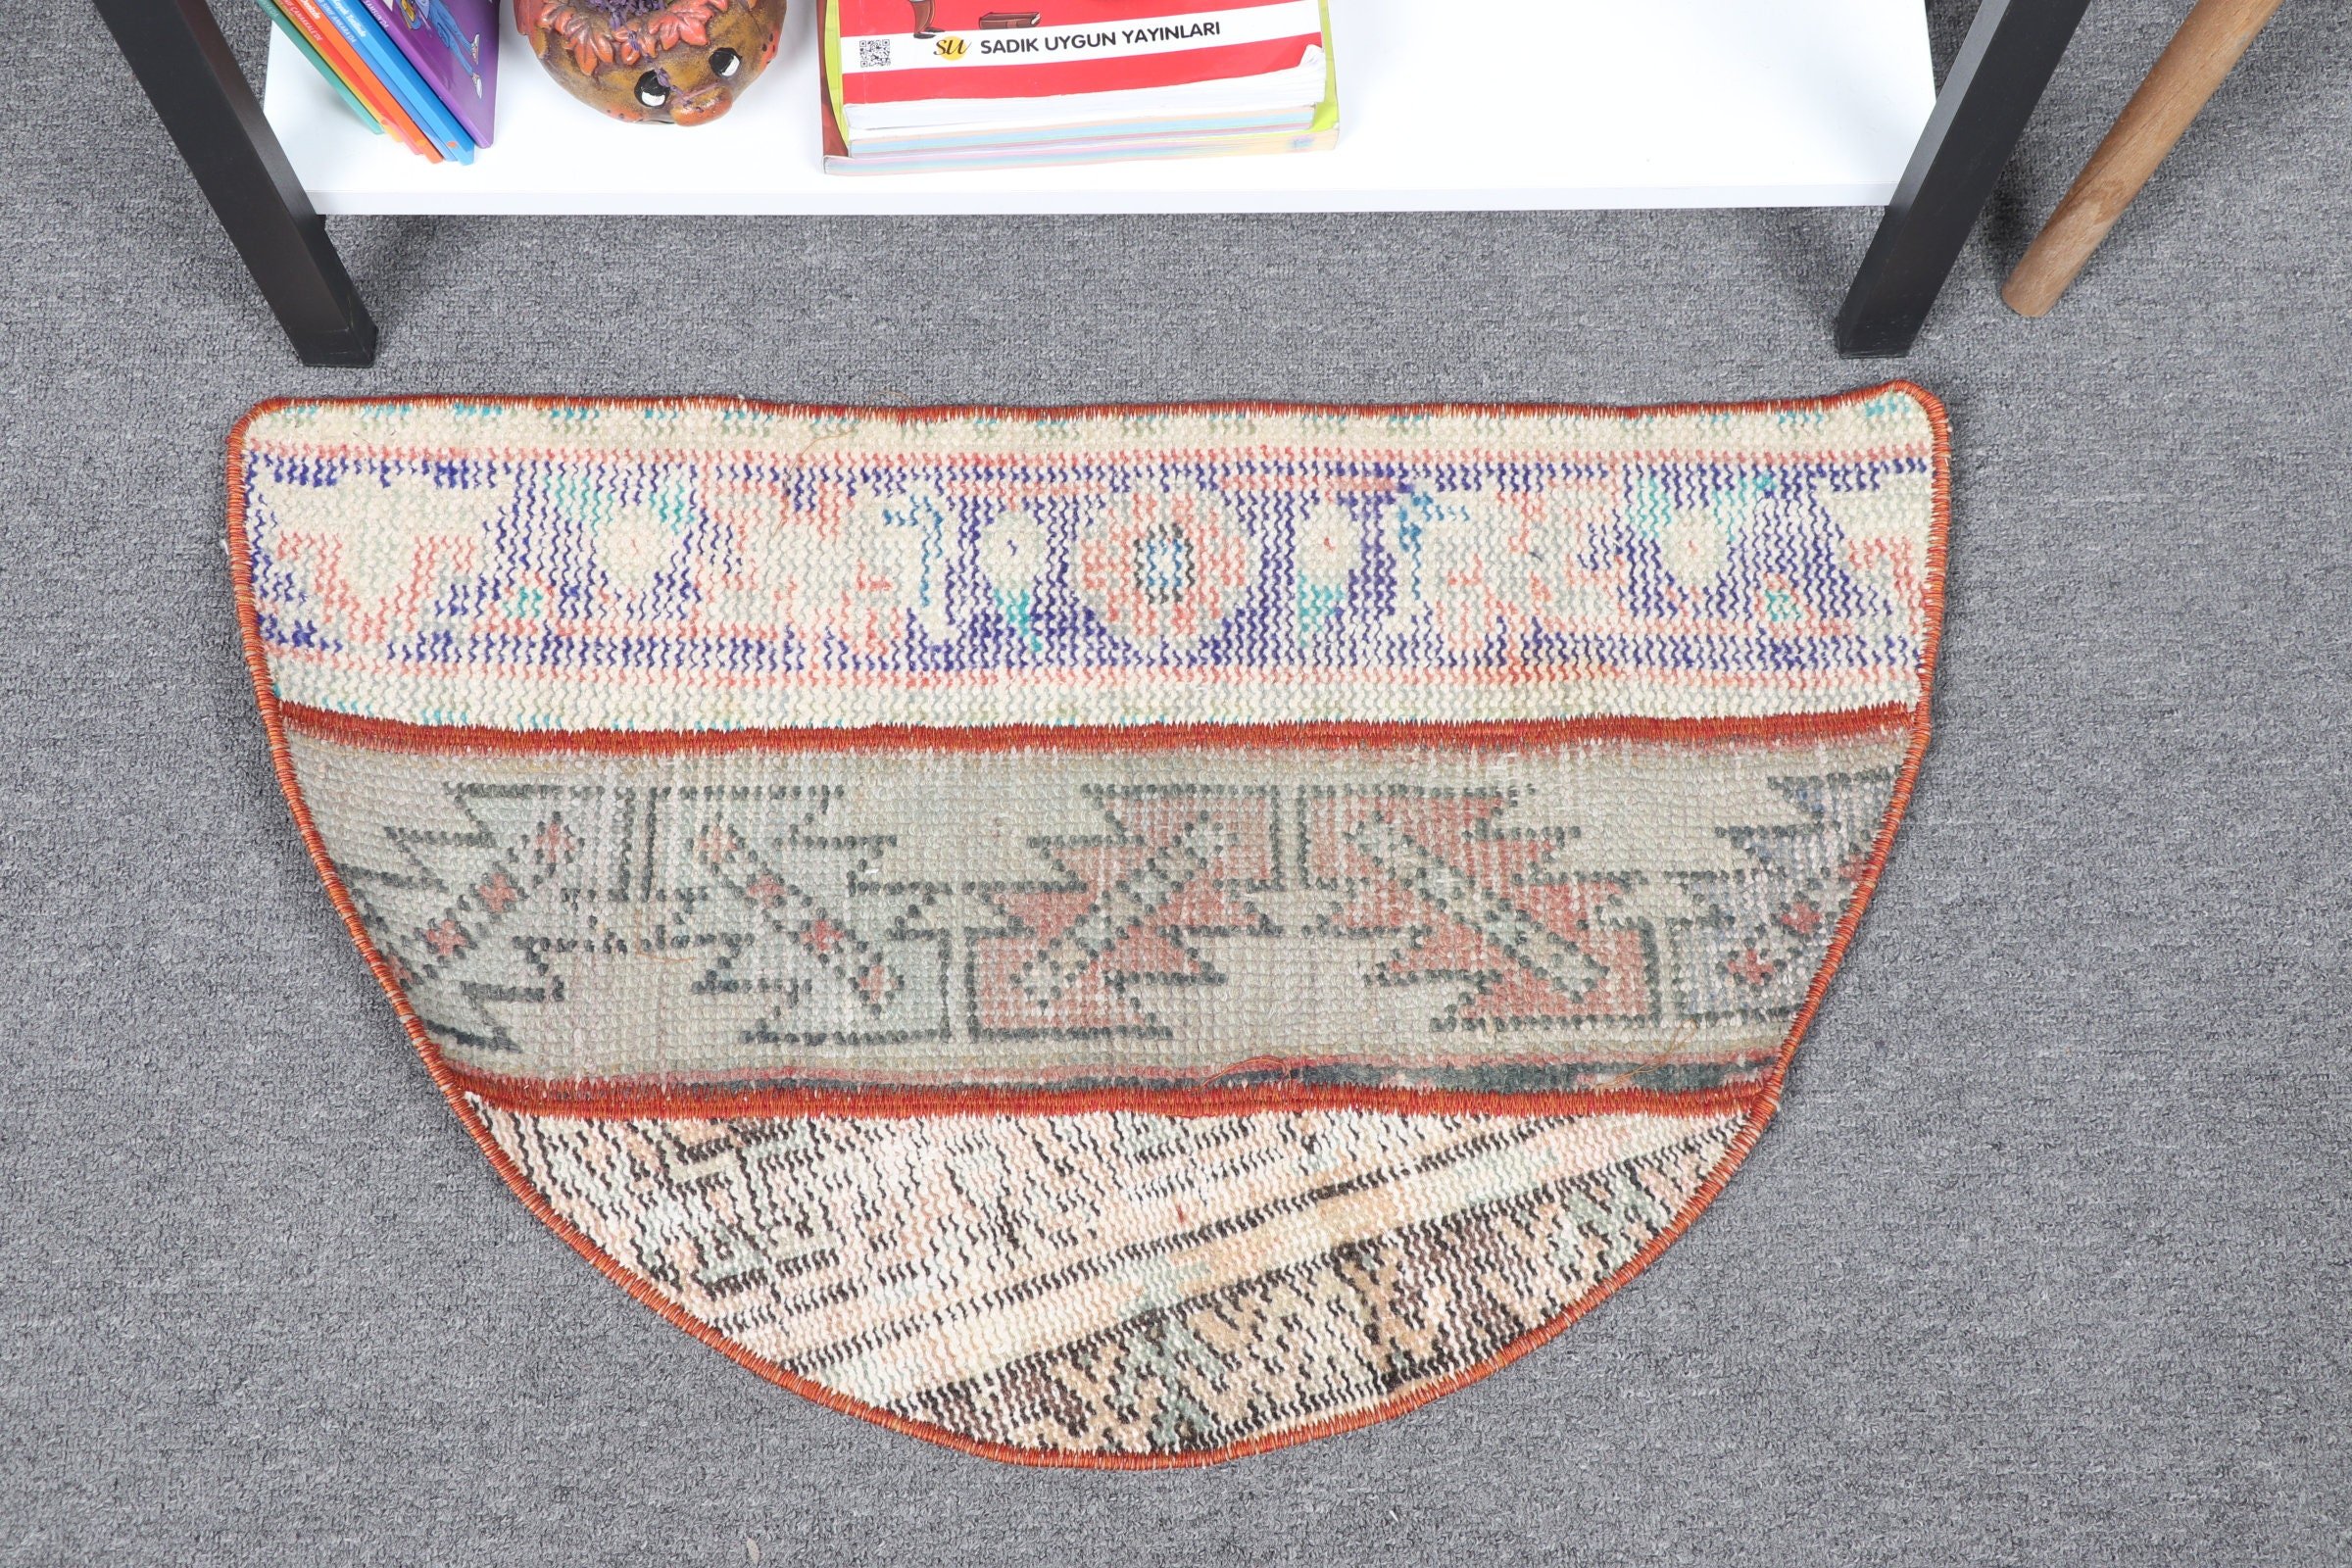 Vintage Rug, Bath Rugs, Rugs for Nursery, Antique Rug, Kitchen Rugs, Home Decor Rug, Beige Antique Rugs, 2.5x1.5 ft Small Rug, Turkish Rug